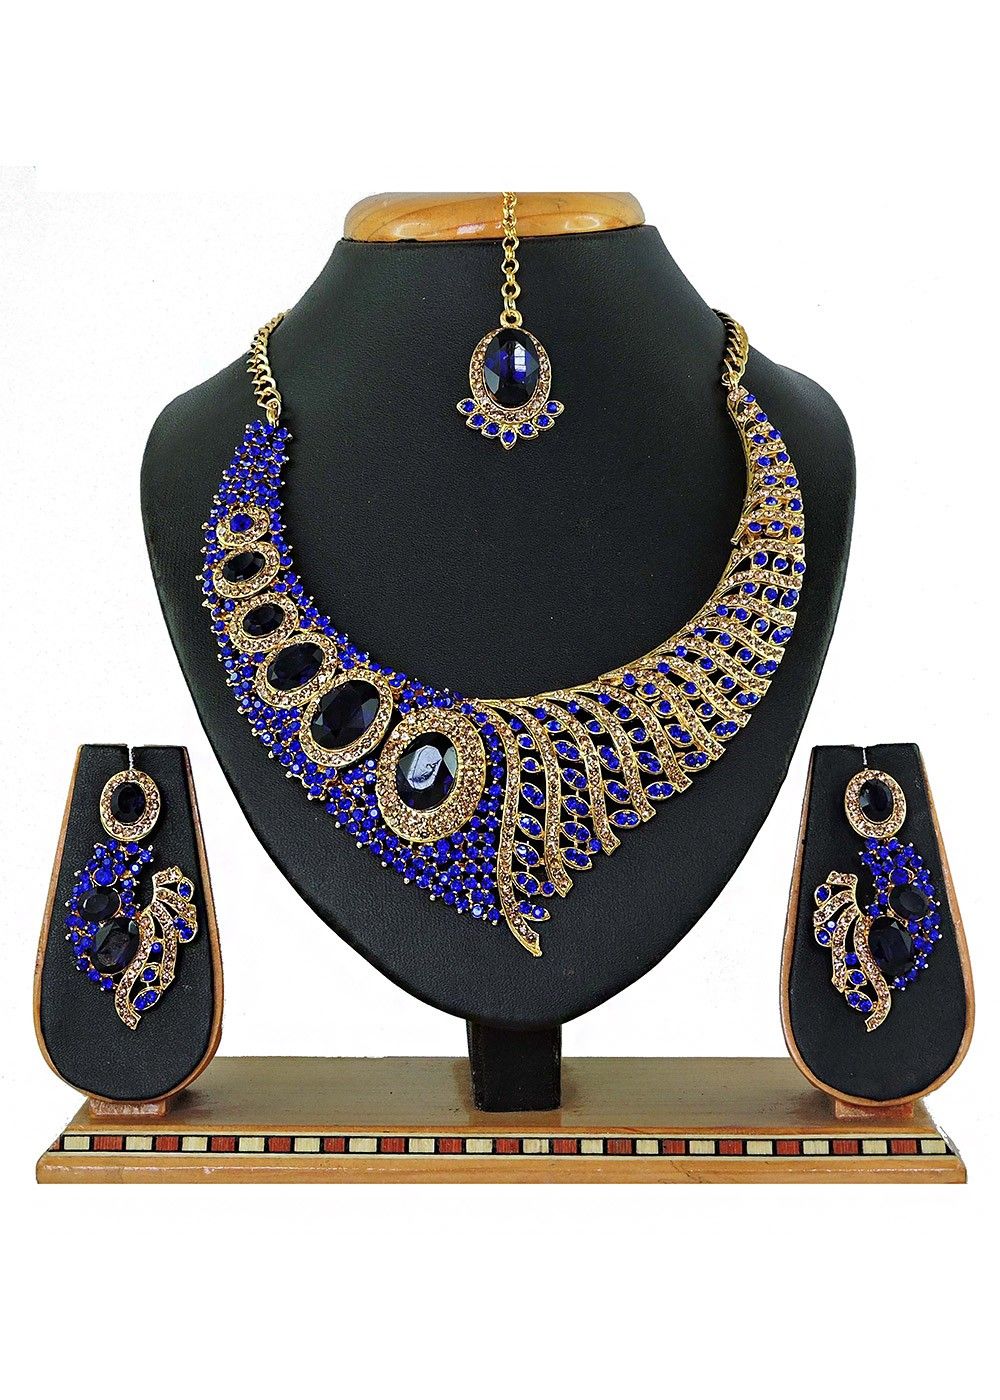 Popular Gold Mart - Traditional Necklaces designed to perfection ...  Completely handcrafted blue stone necklace with gopu inlay .. DM/ Whatsapp  us for more details #goldnecklaces #southindianjewellery  #traditionaljewelry #goldnecklace #bridaljewellery ...